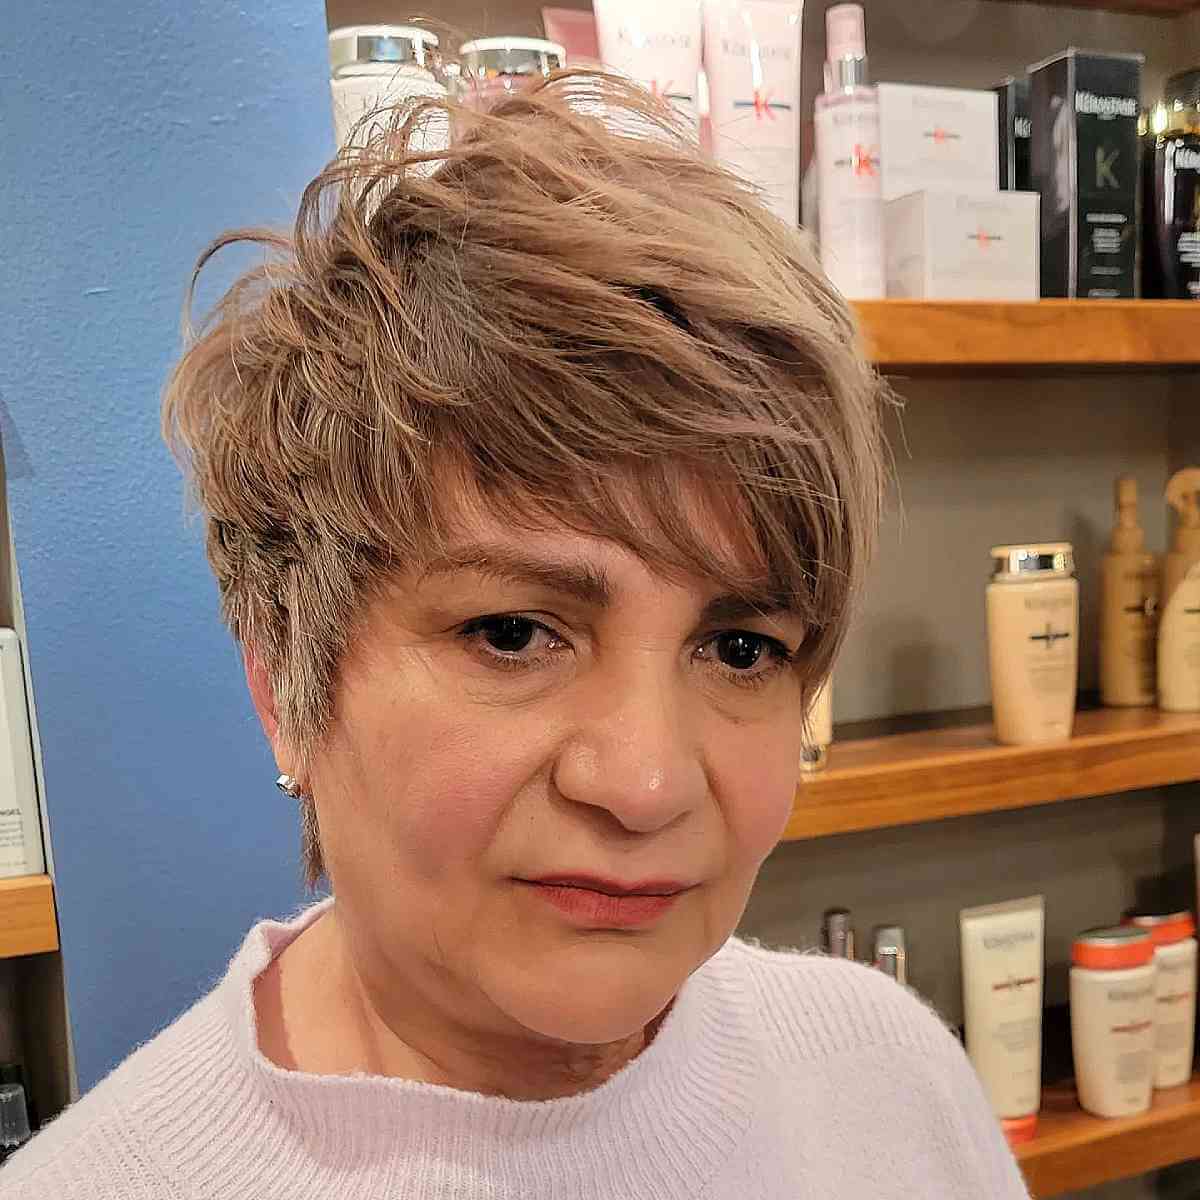 Shaggy pixie haircut for women over 50 years old